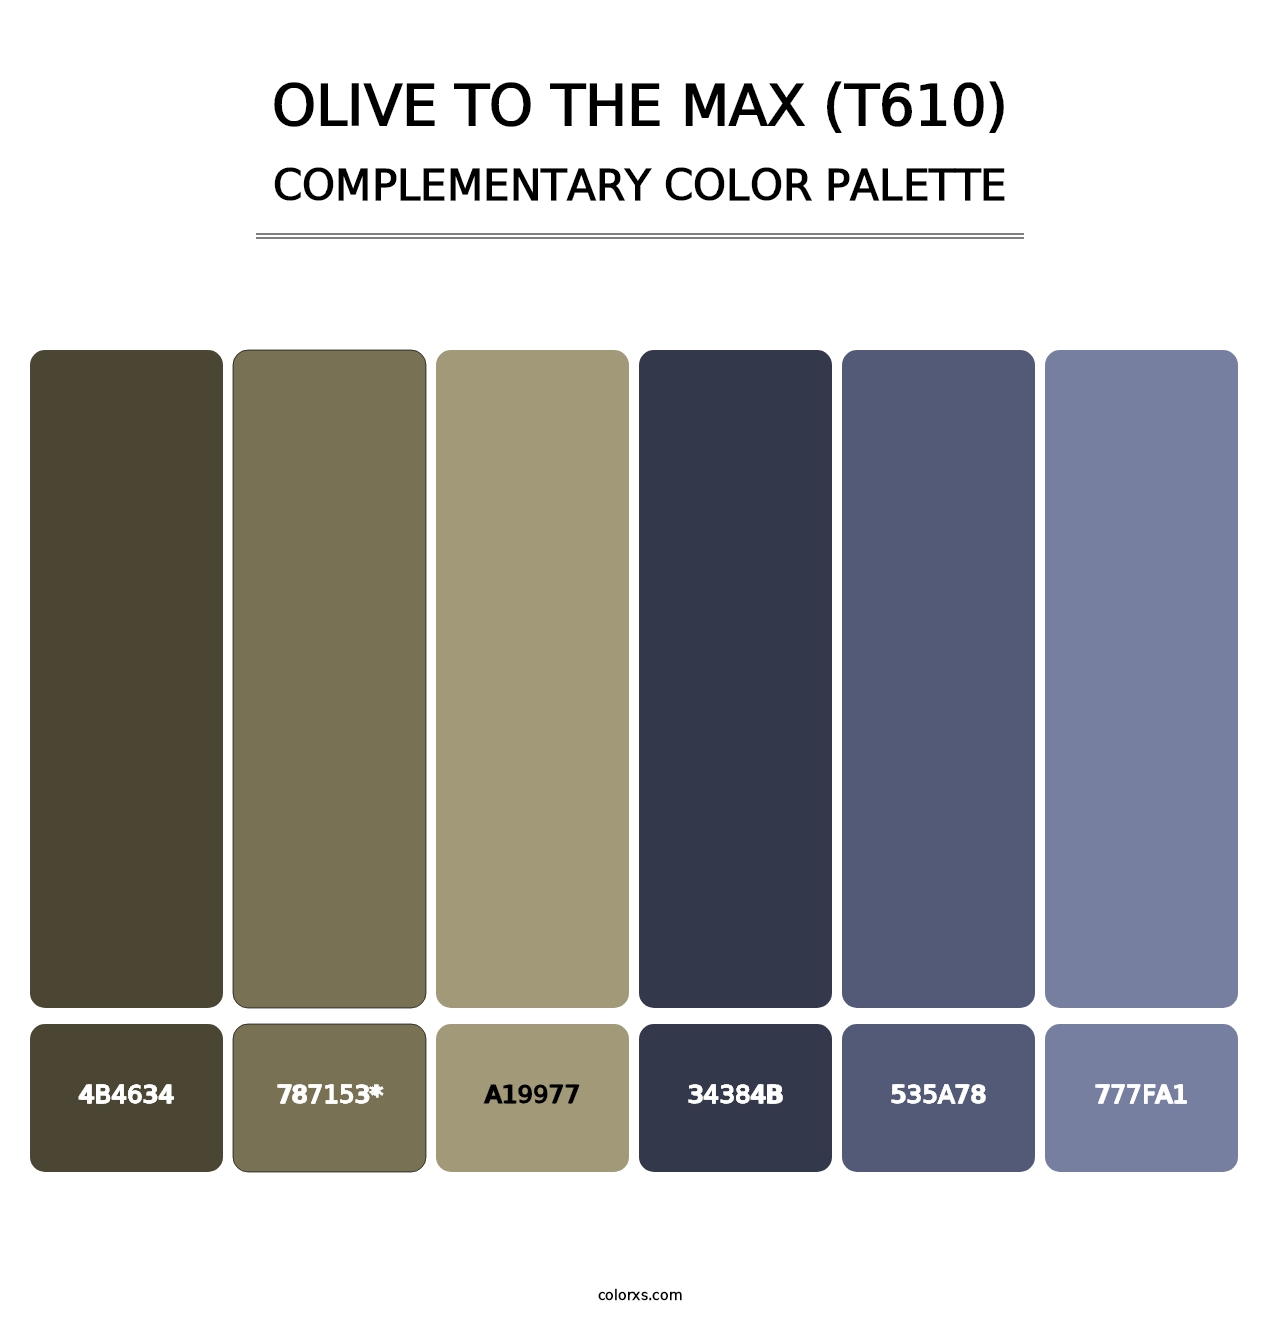 Olive to the Max (T610) - Complementary Color Palette